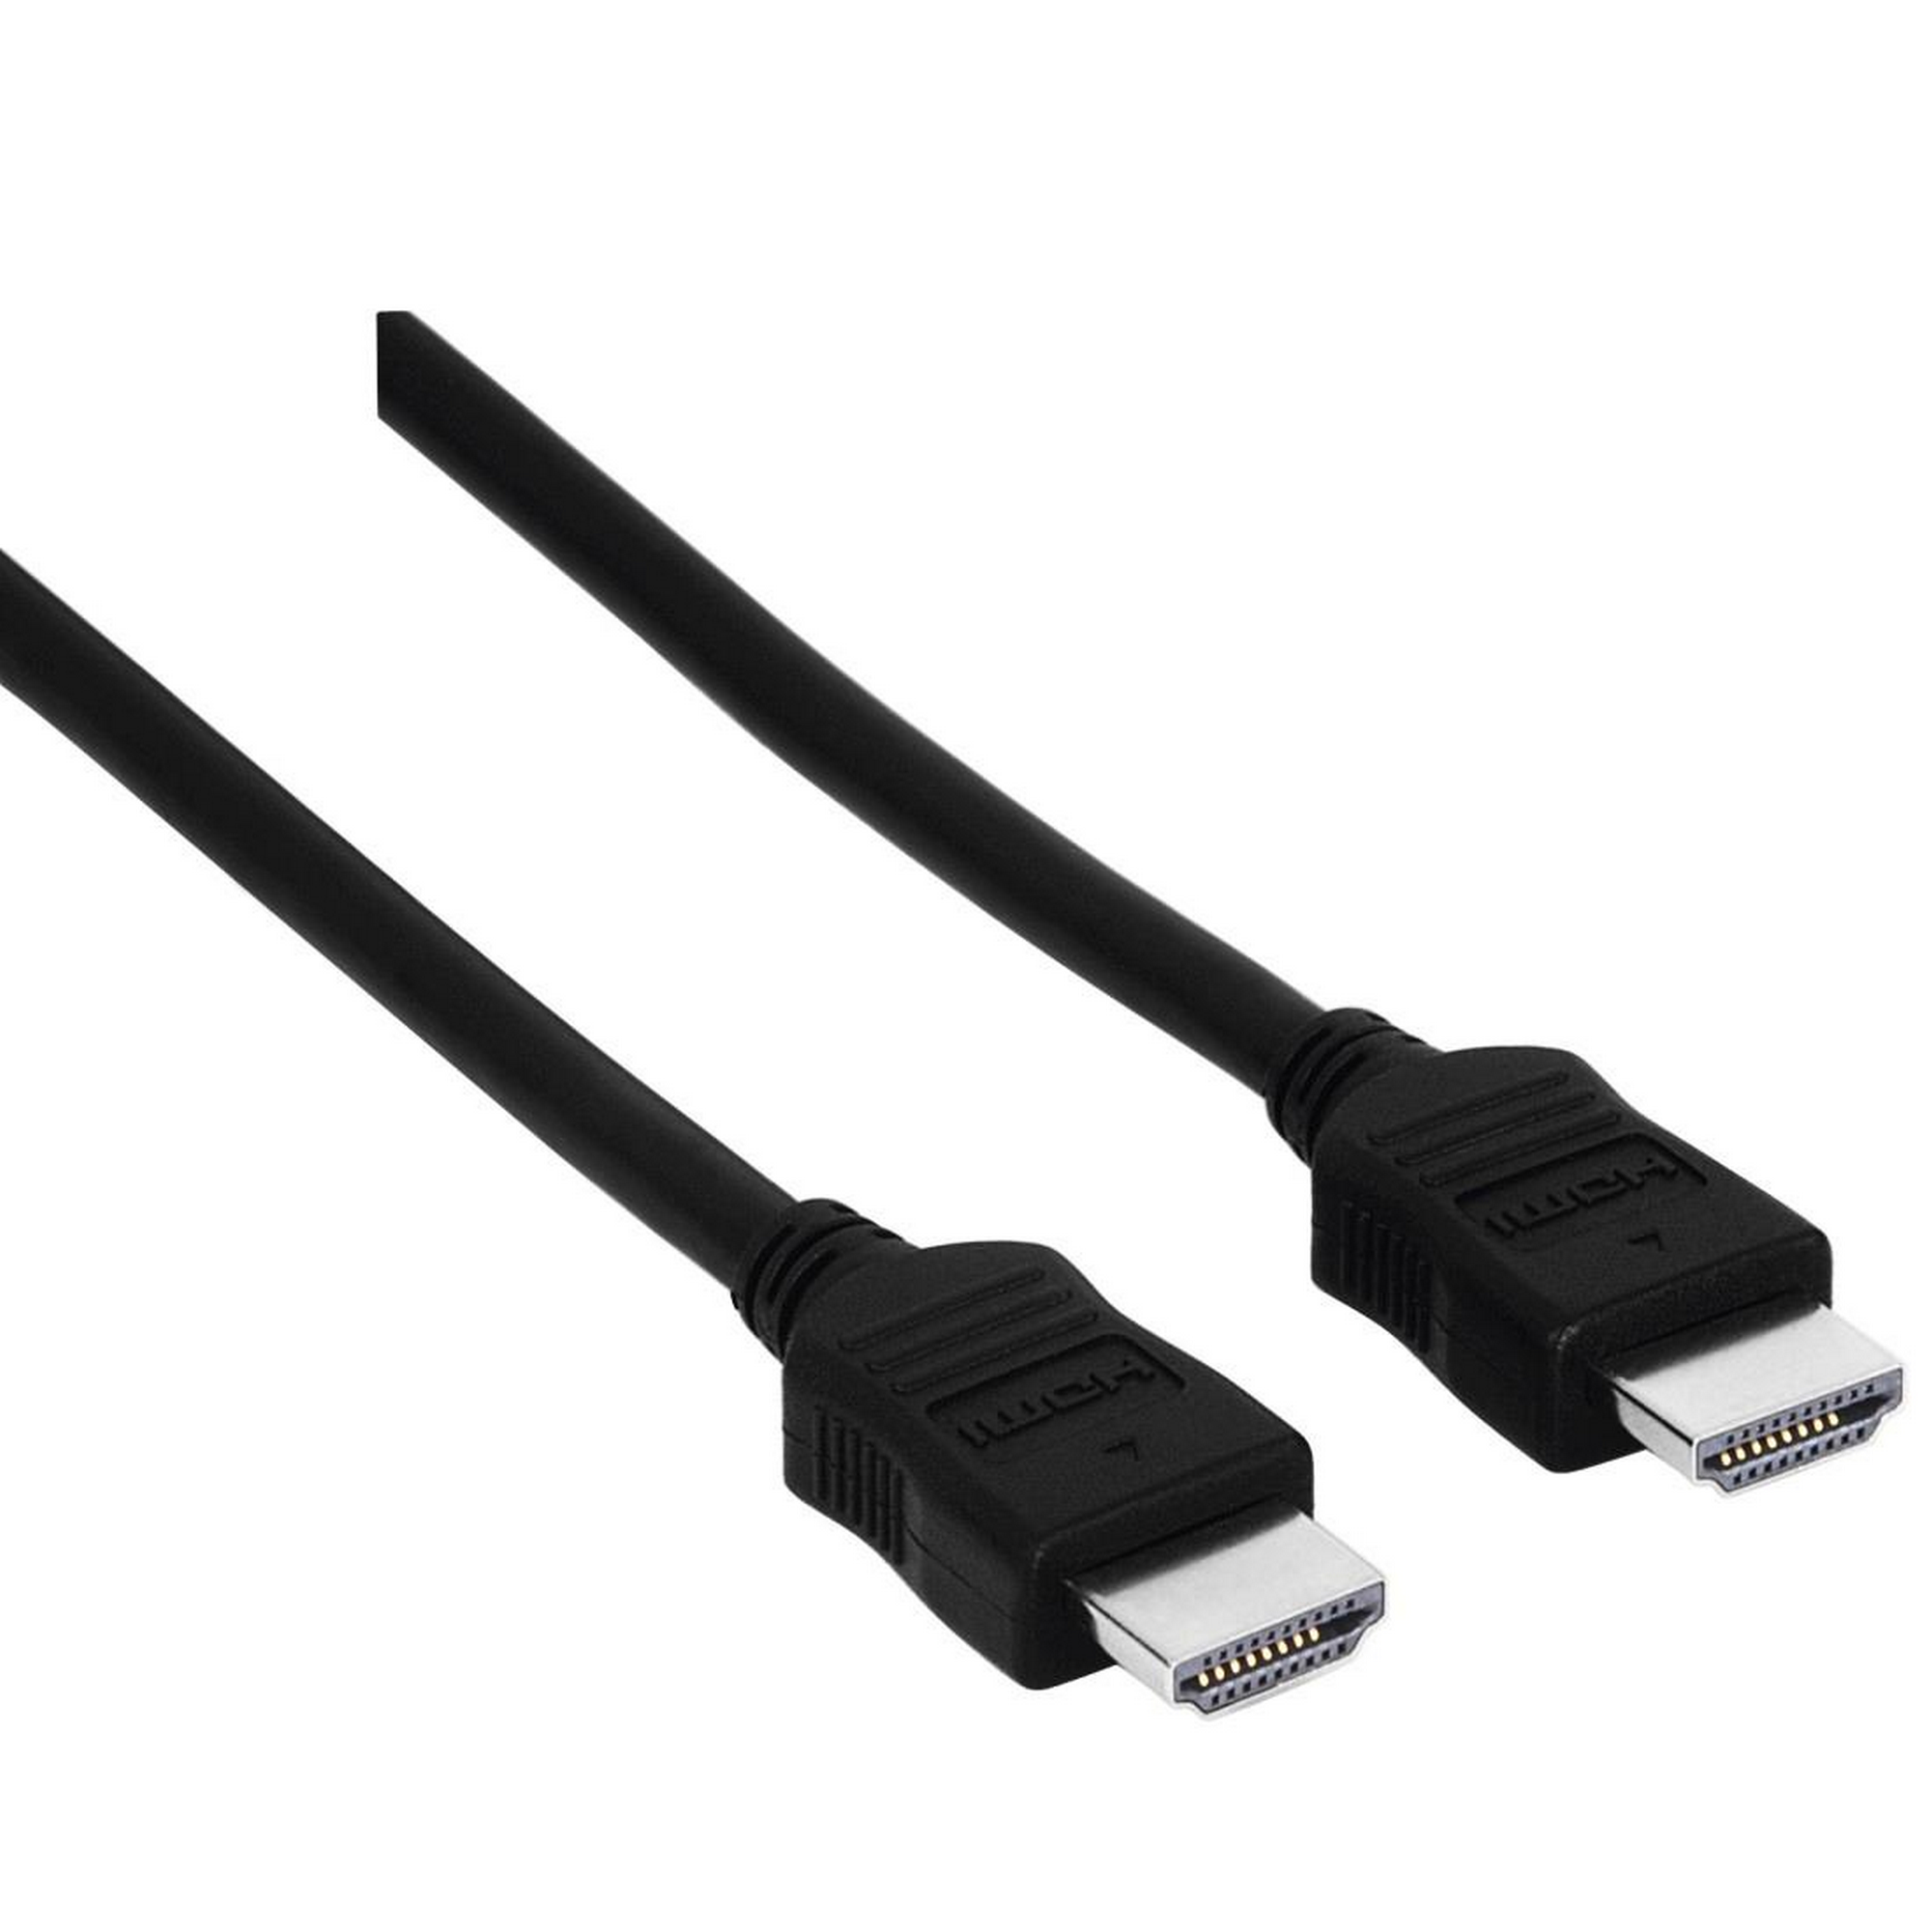 HDMI-Kabel 'Entry Line' High-Speed schwarz 5 m + product picture